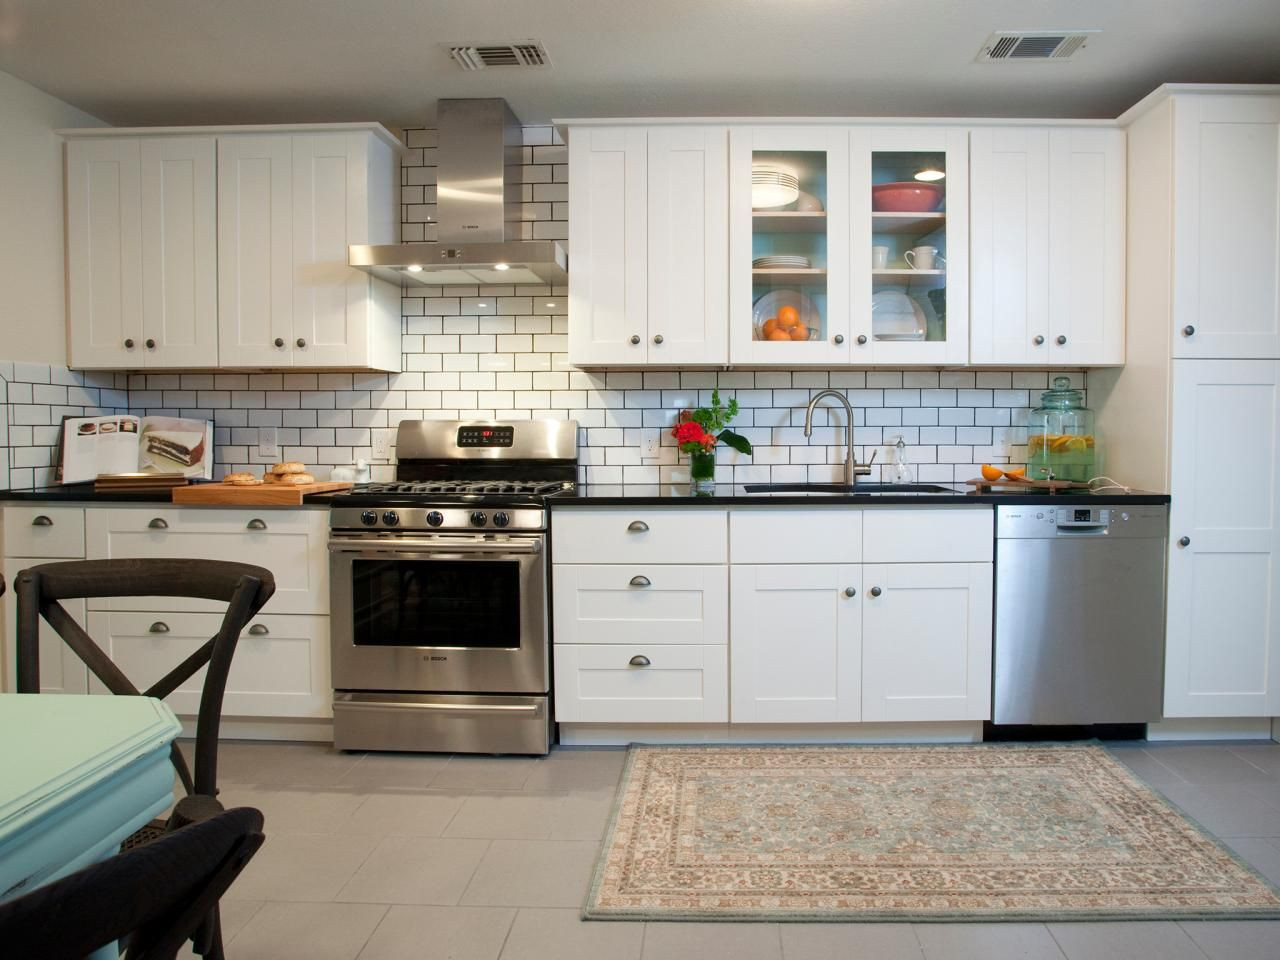 Subway Tile Backsplash In Kitchen
 Dress Your Kitchen In Style With Some White Subway Tiles